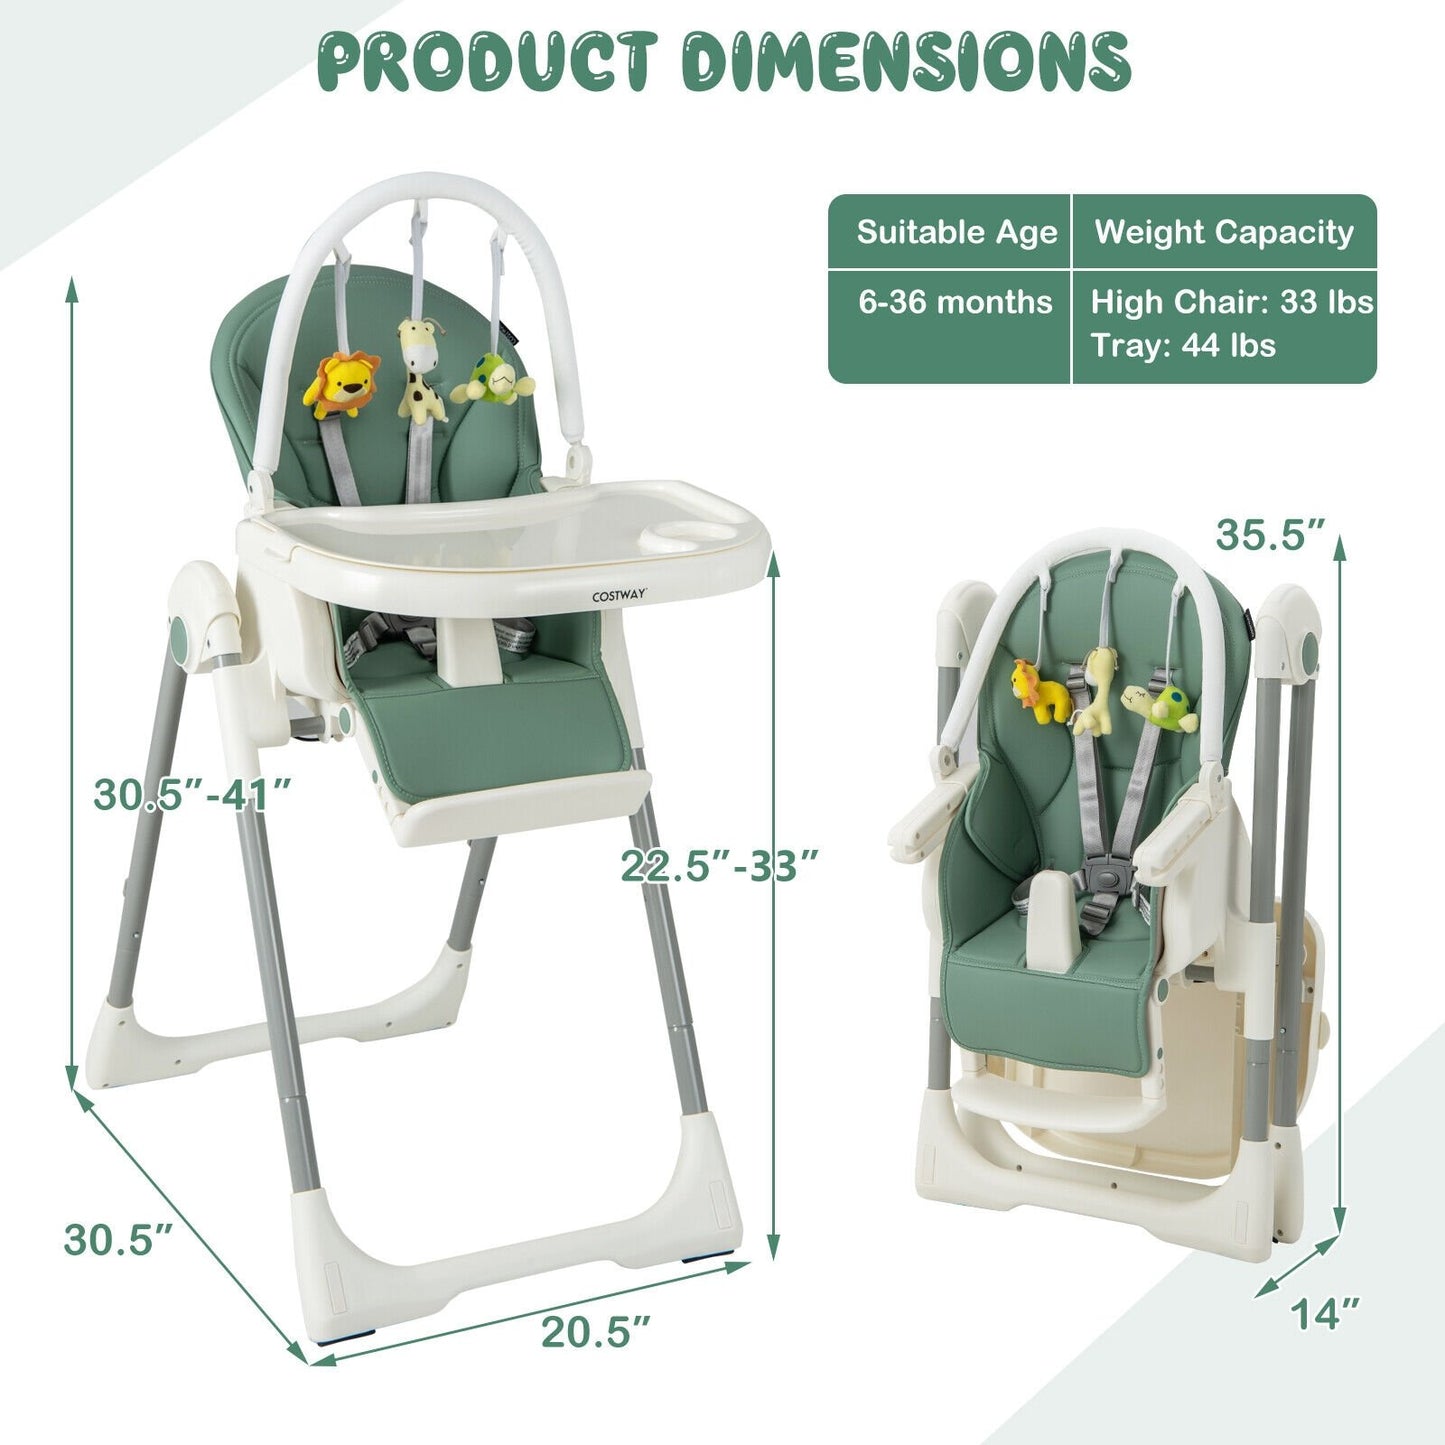 4-in-1 Foldable Baby High Chair with 7 Adjustable Heights and Free Toys Bar, Green